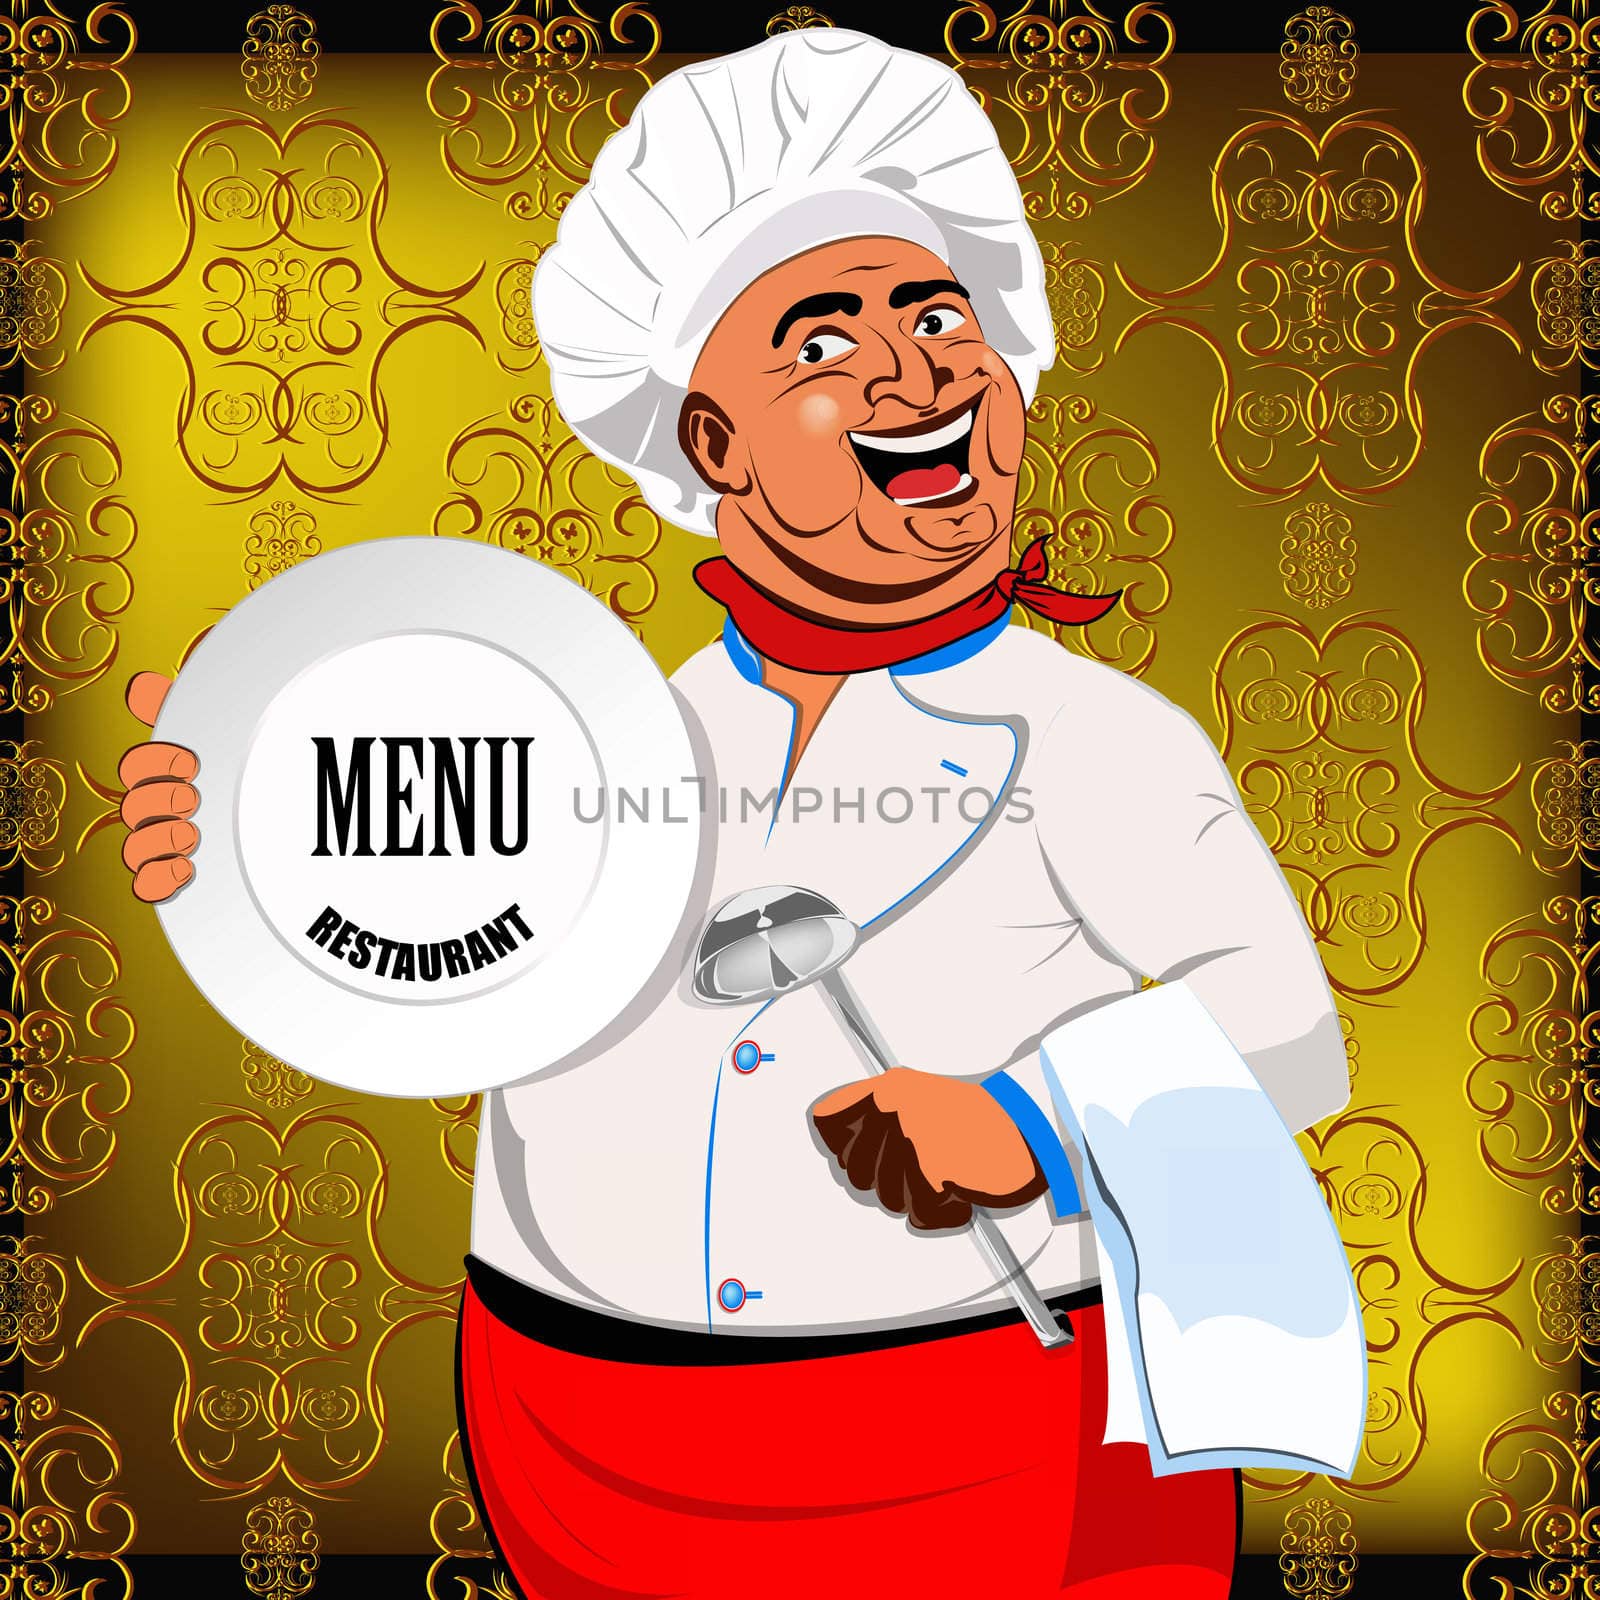 Eastern Chef and big plate on a abstract decorative background by sergey150770SV